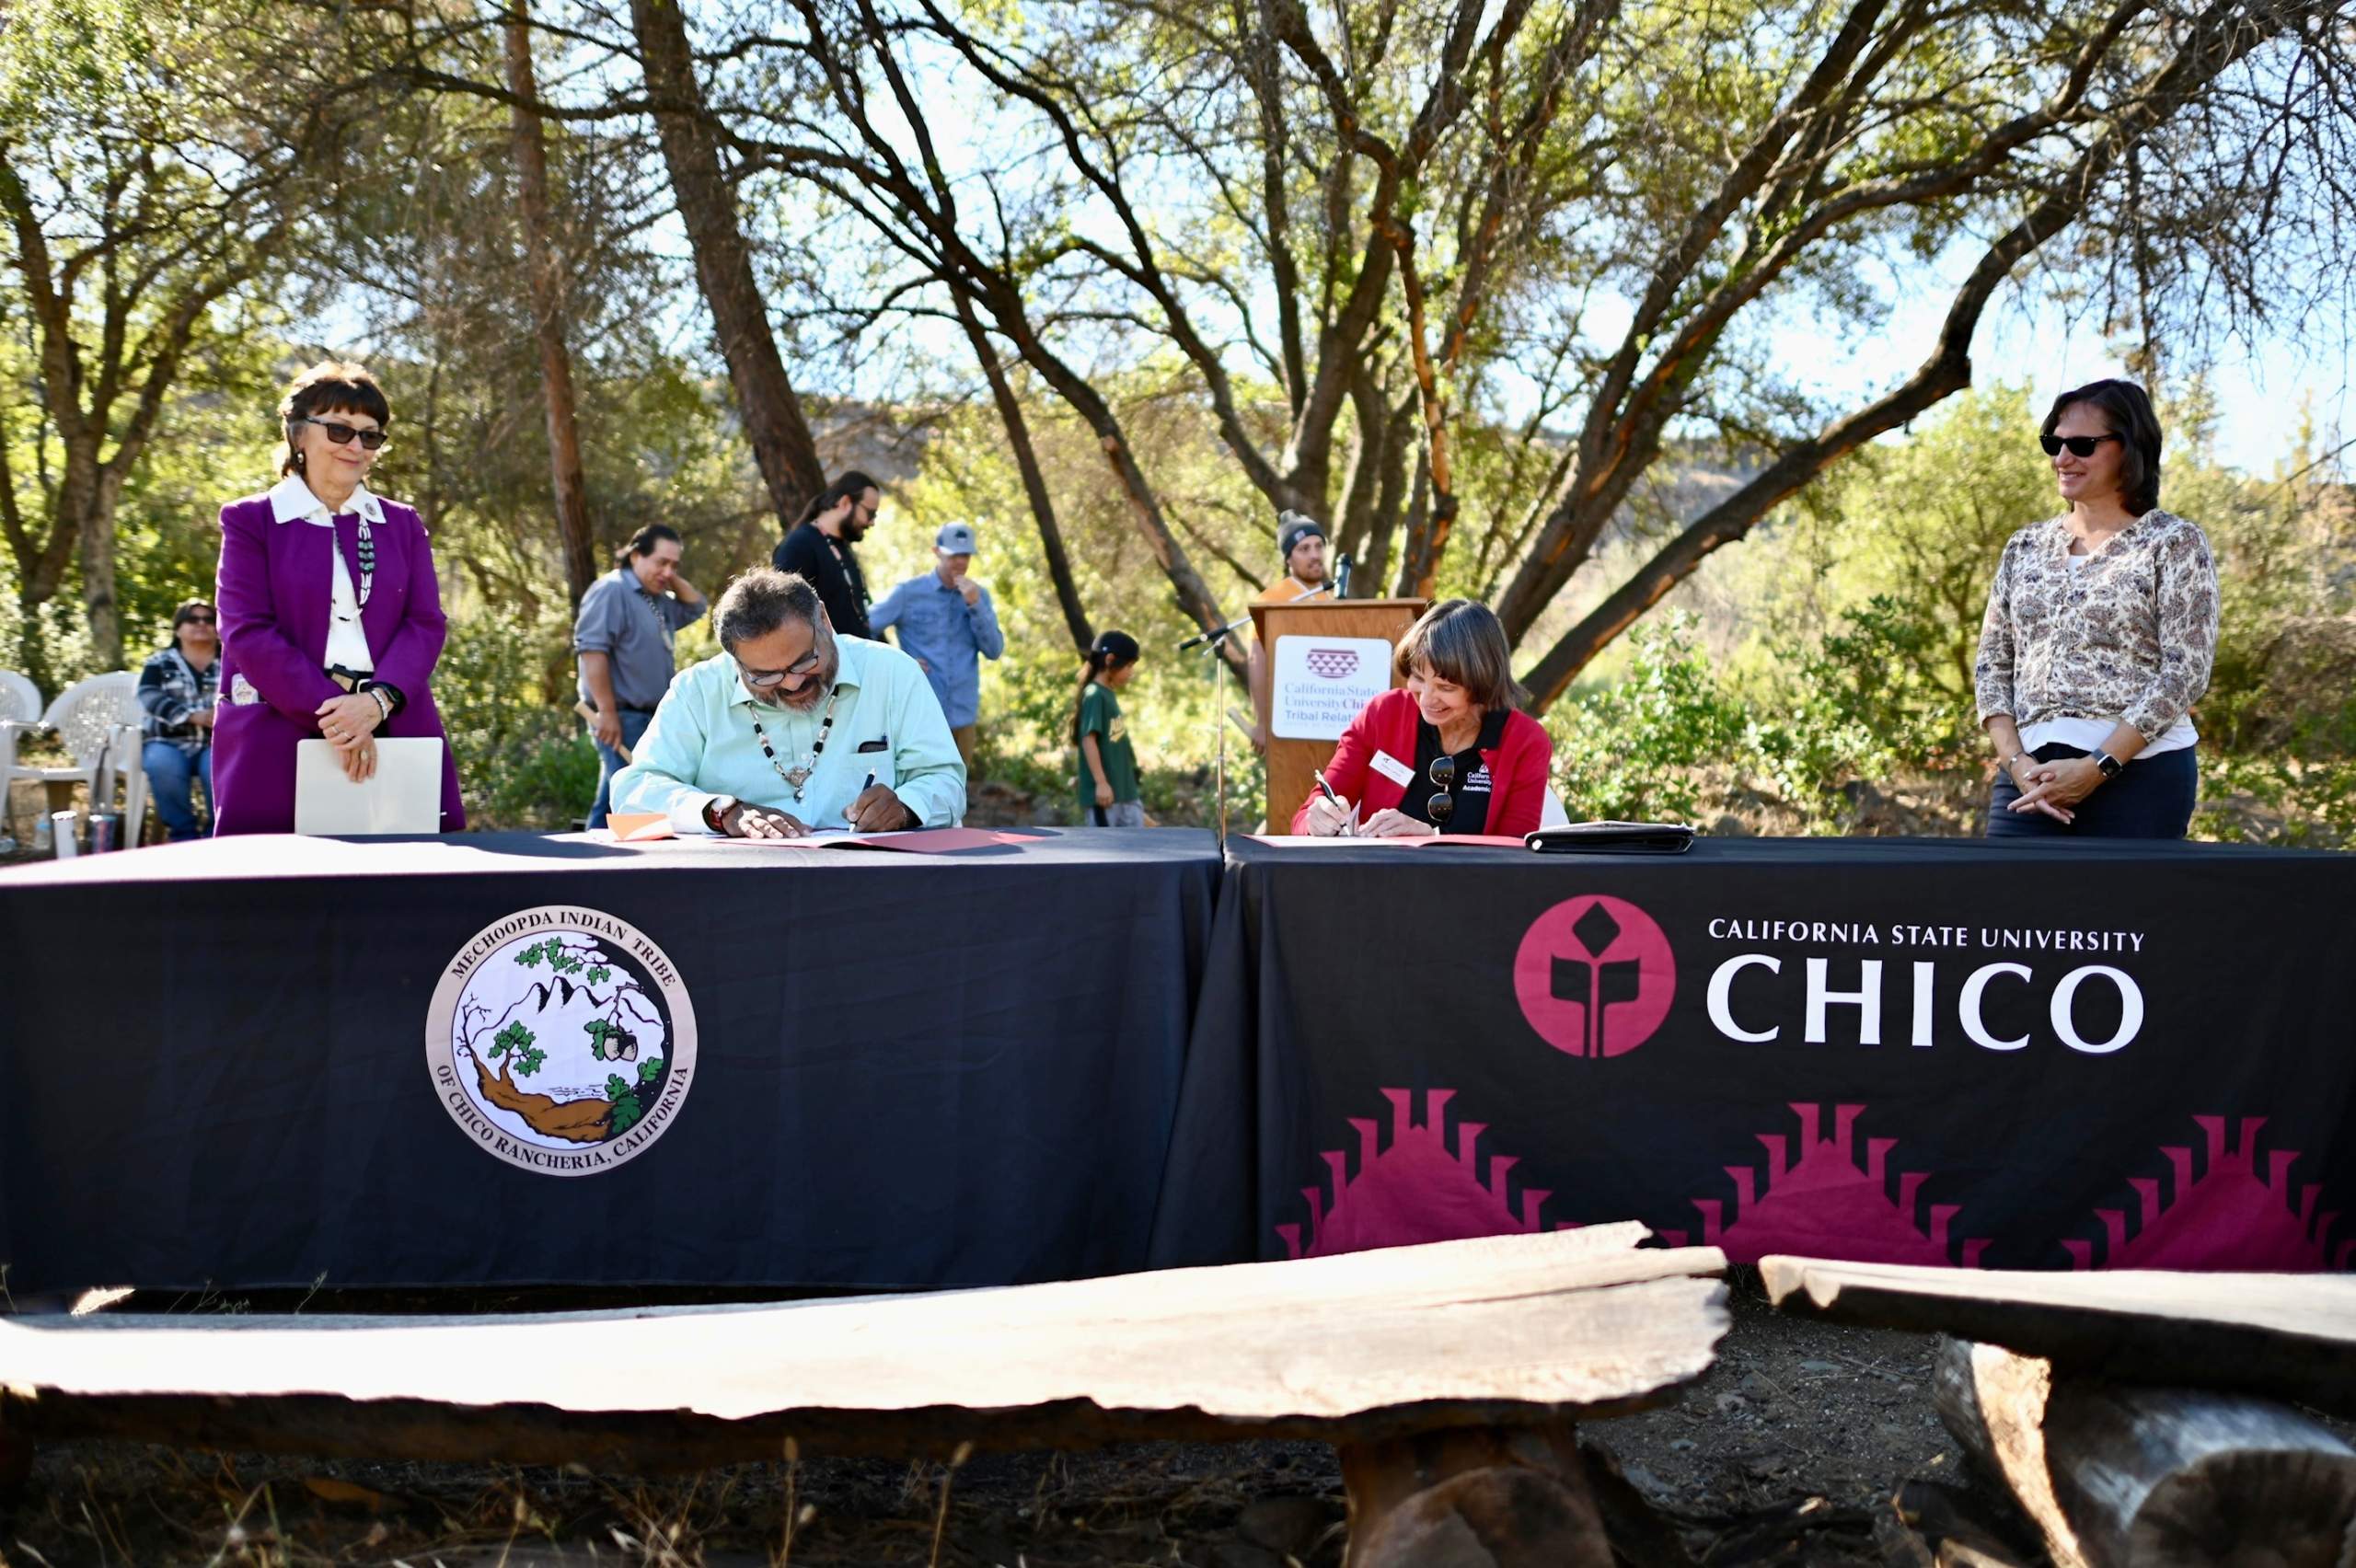 Chico State Provost Debra Larson and Mechoopda Chairman Dennis Ramirez sign documents at a table at the Butte Creek Ecological Preserve